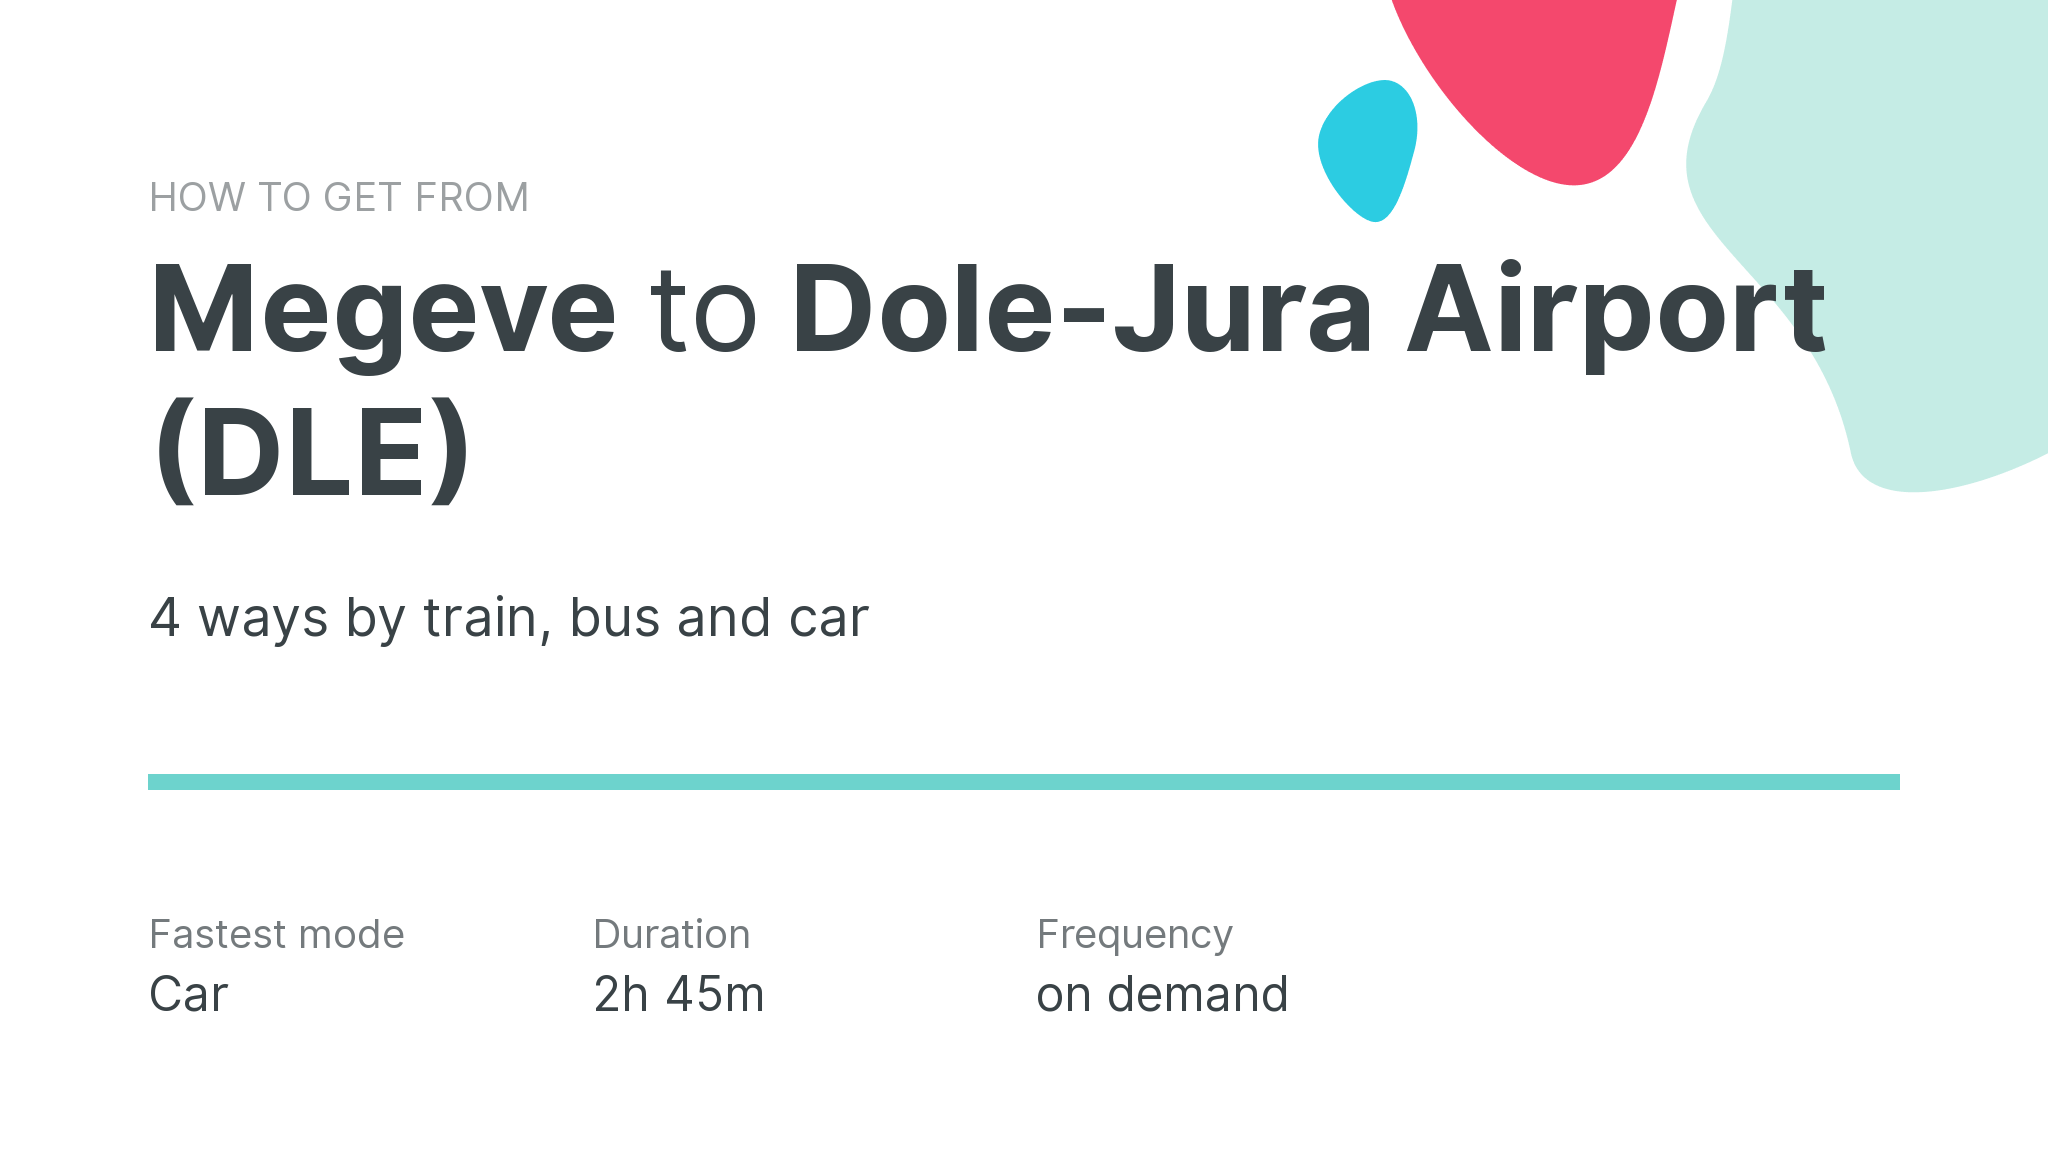 How do I get from Megeve to Dole-Jura Airport (DLE)